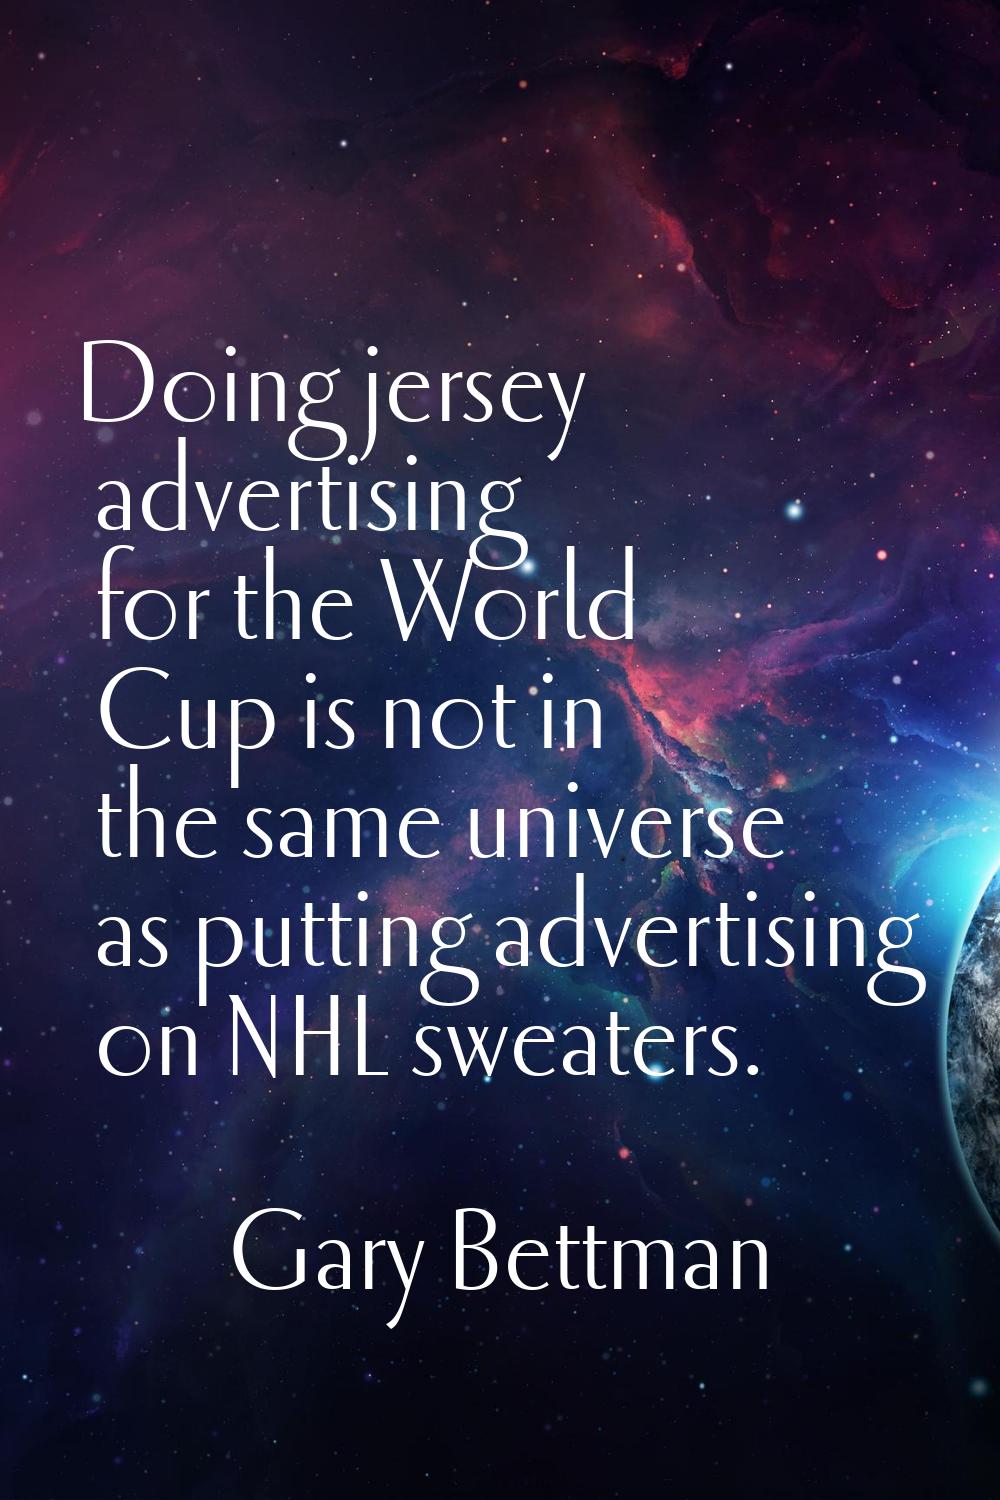 Doing jersey advertising for the World Cup is not in the same universe as putting advertising on NH